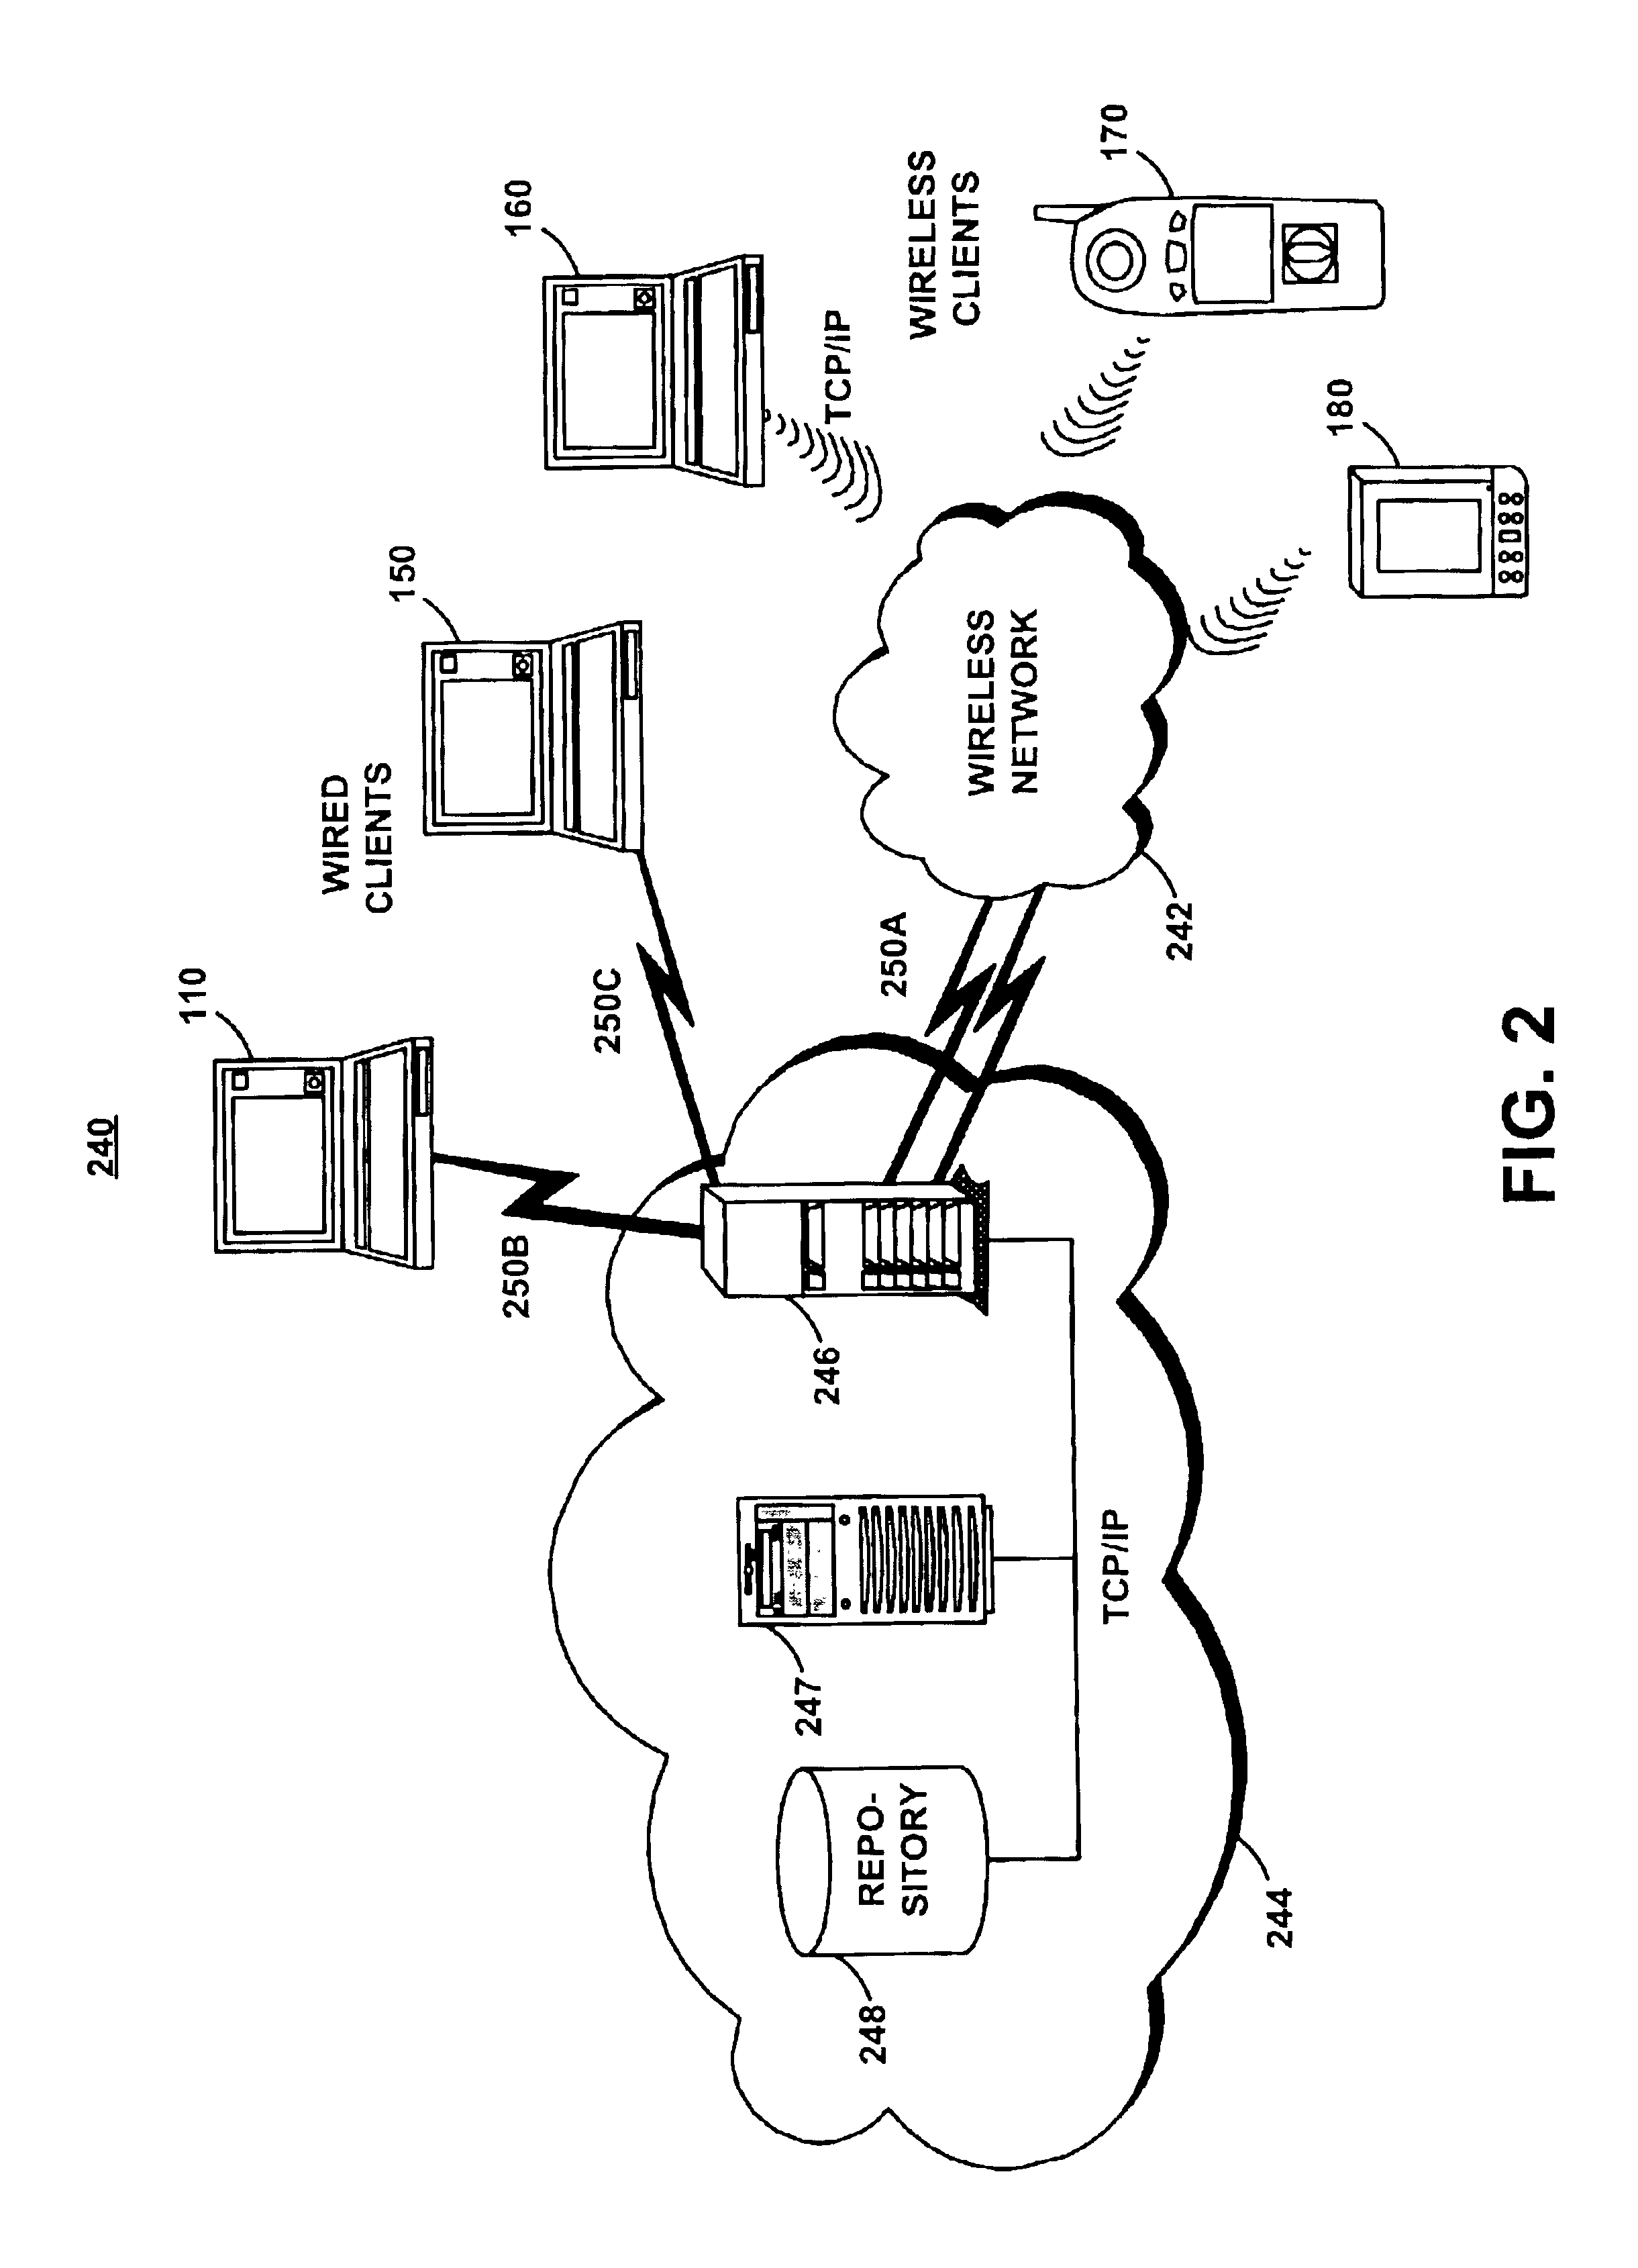 System and method for content-based querying using video compression format